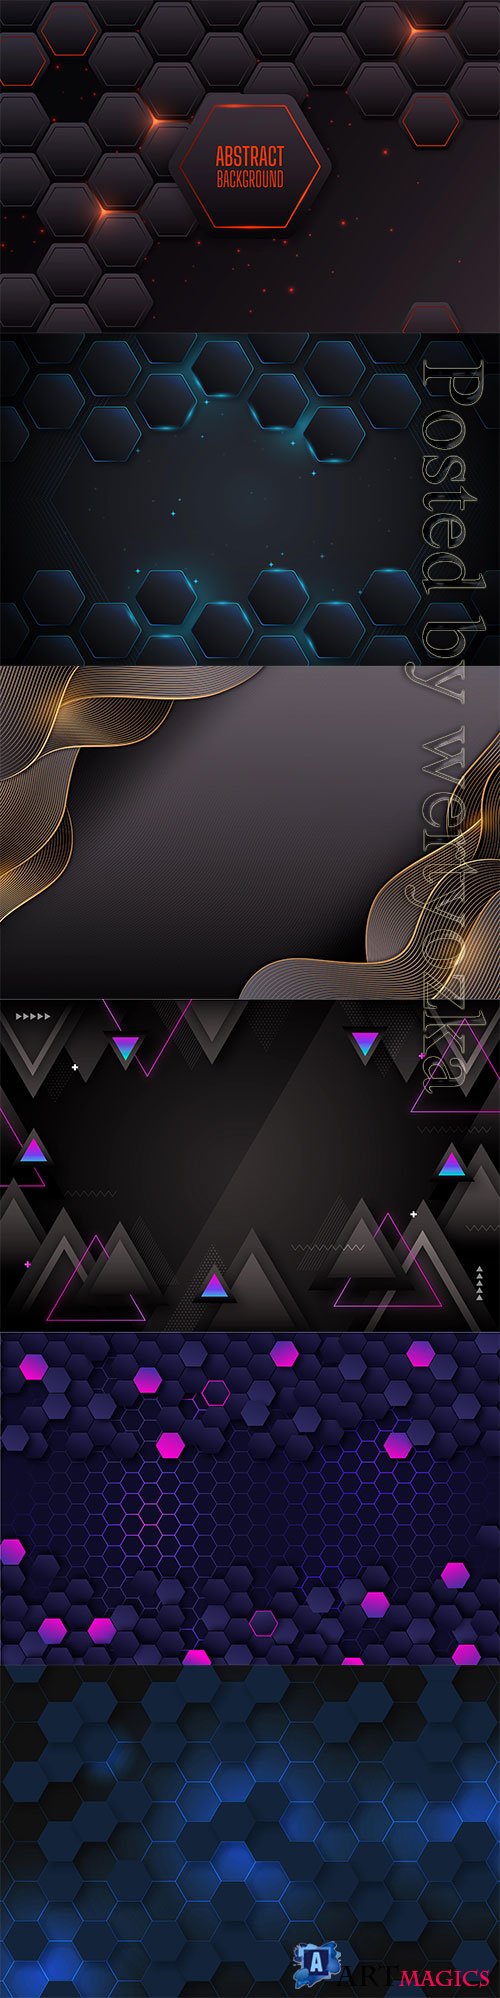 Luxury abstract geometric vector background